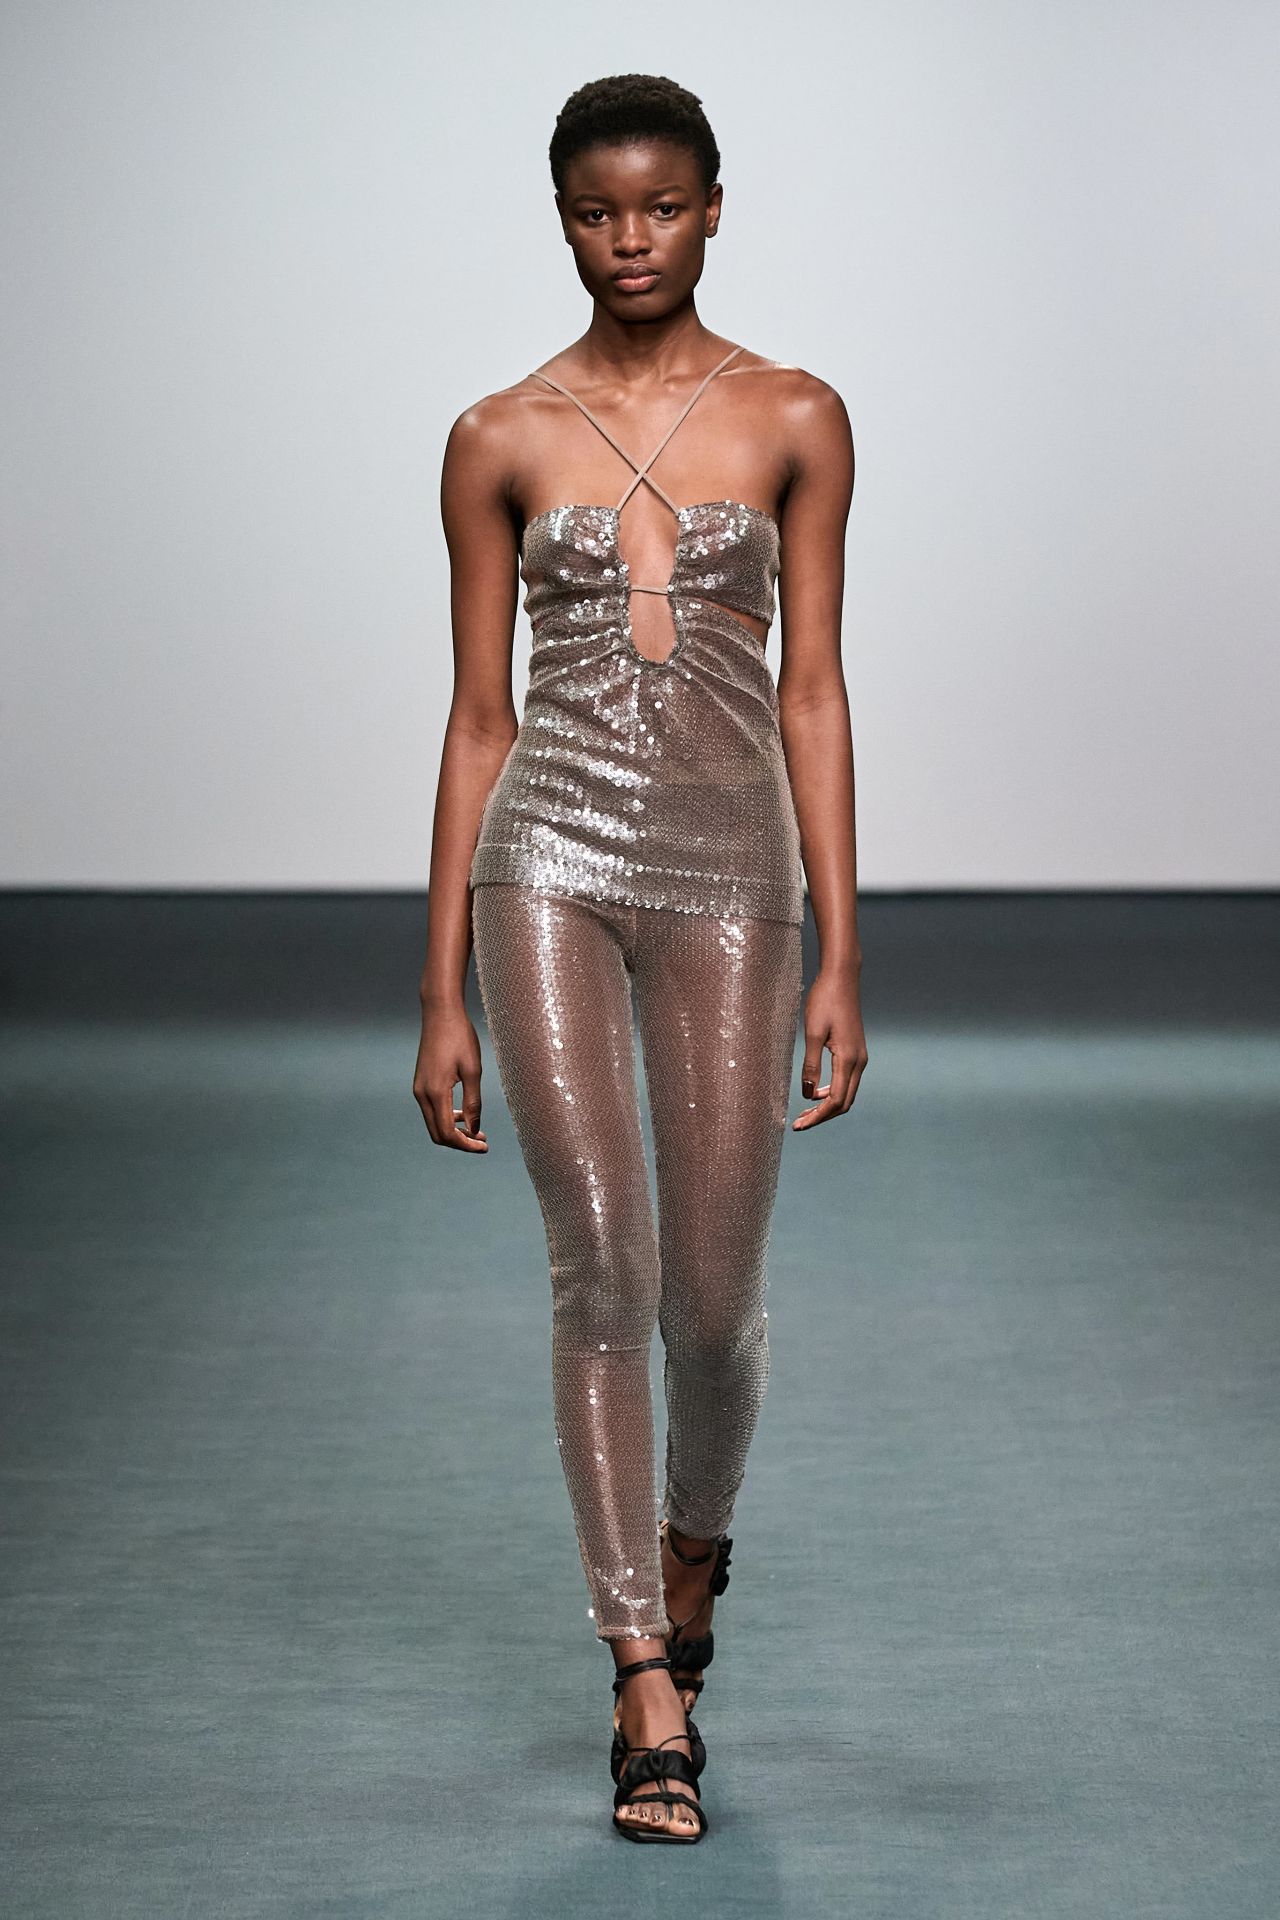 Dojaka digressed from her typical monochrome palette to include two sequined looks.